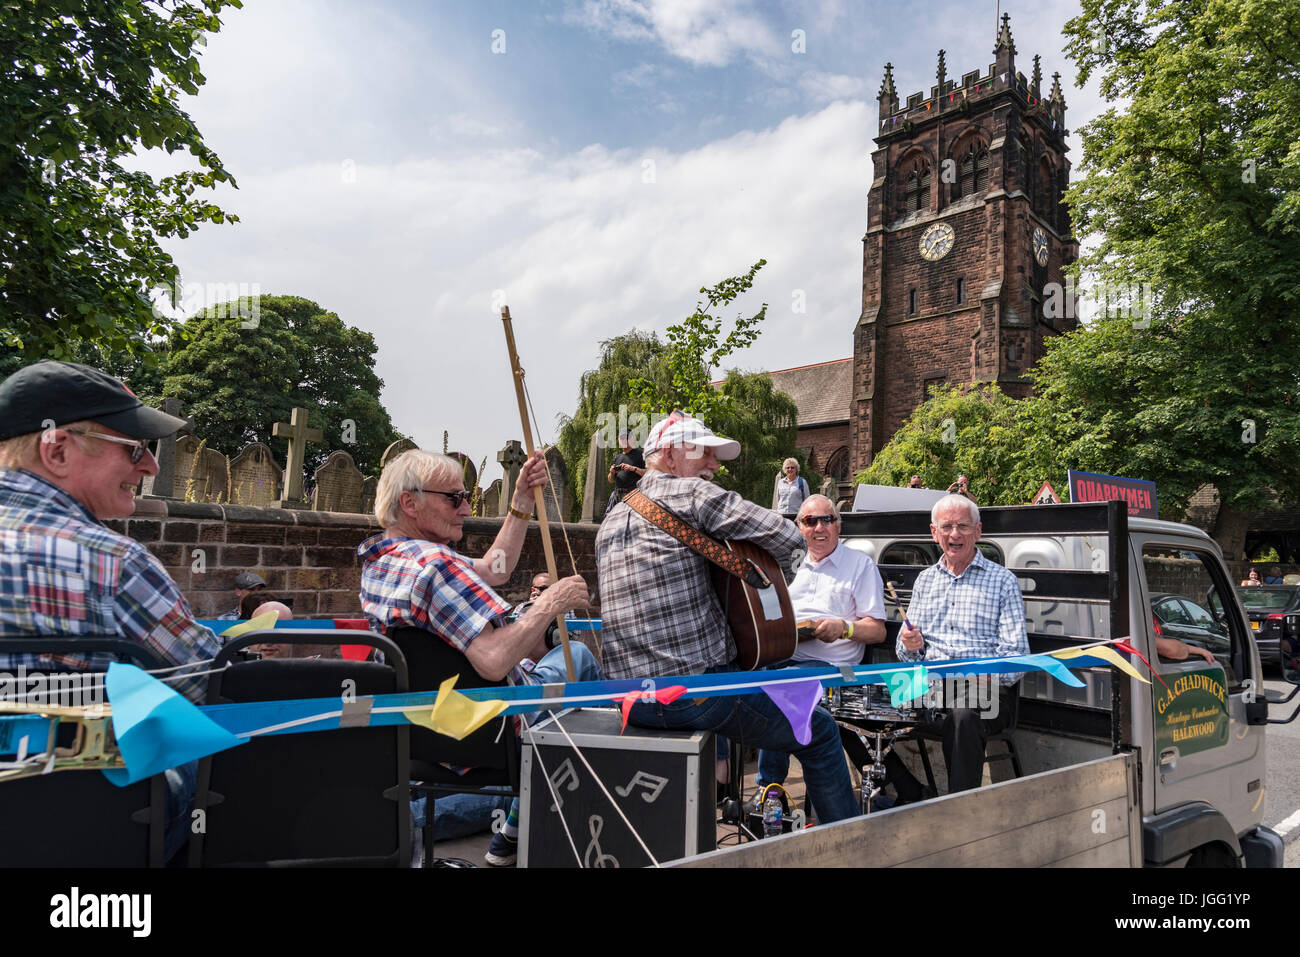 Woolton, Liverpool, UK. 6th July 2017. A parade was held in Woolton Liverpool today to mark the day 60 years ago at the St. Peter's church fete that brought John Lennon and Paul McCartney together to form the Beatles. John Lennon's original band The Quarrymen took a ride round the village on a local lorry and today surviving members of the group recreated the drive with original lorry driver Dougie Chadwick at the wheel. Credit: John Davidson/Alamy Live News Stock Photo